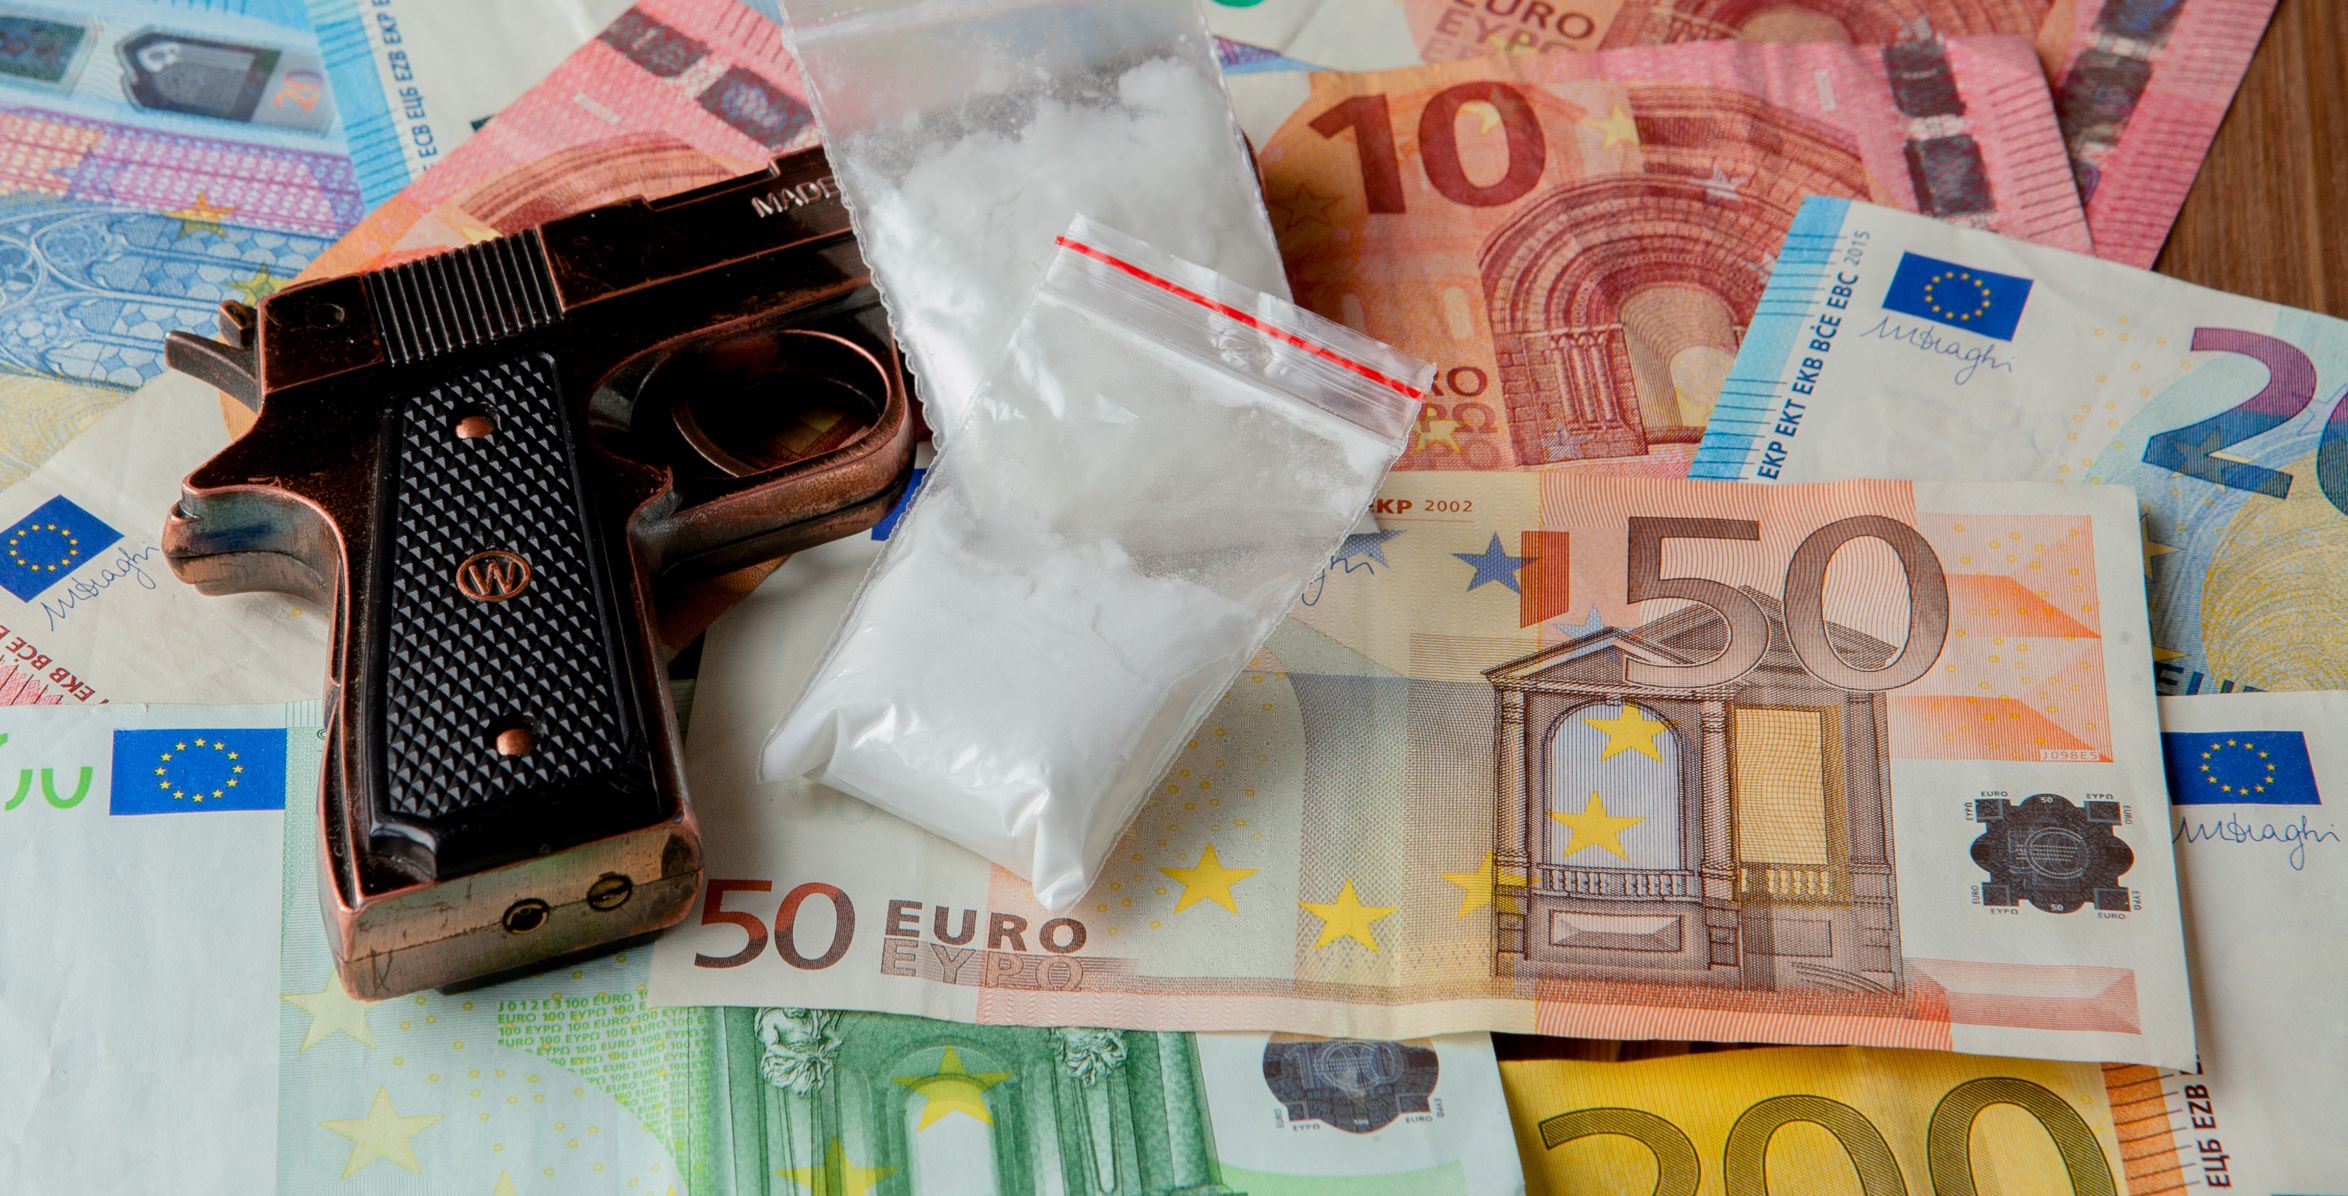 euro notest with a handgun and white powder in a clear bag